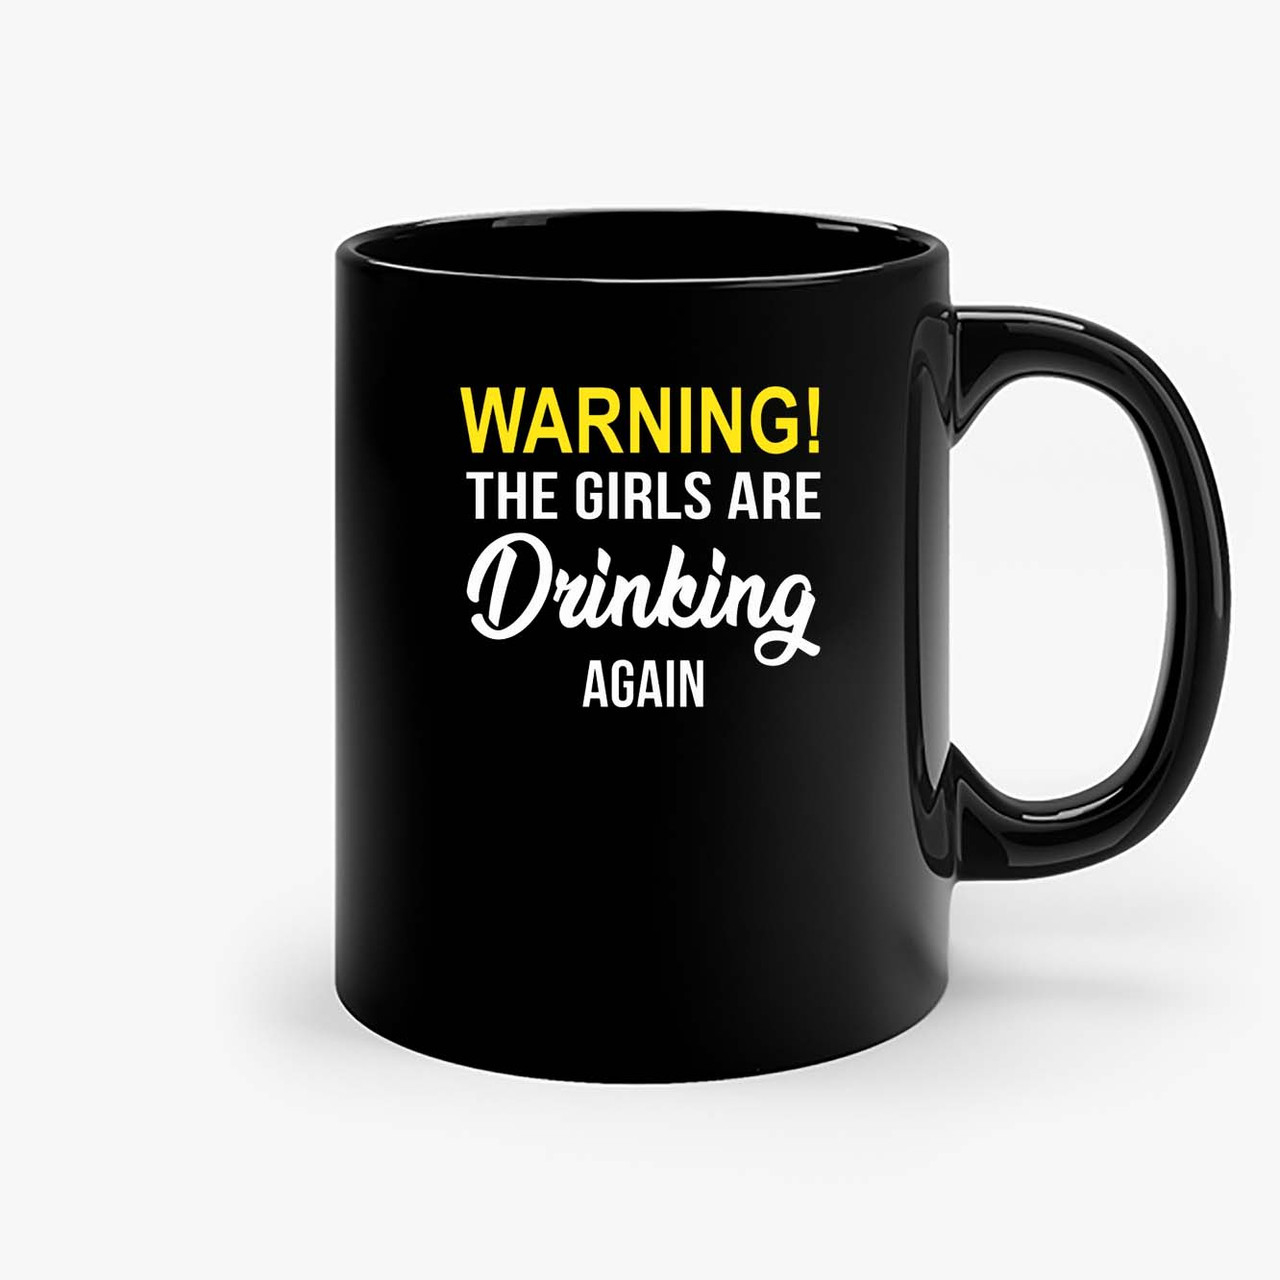 https://cdn11.bigcommerce.com/s-fbh9rcmv2i/images/stencil/1280x1280/products/752666/799295/warning_the_girls_are_drinking_again_funny_gift__42149.1697770168.jpg?c=1